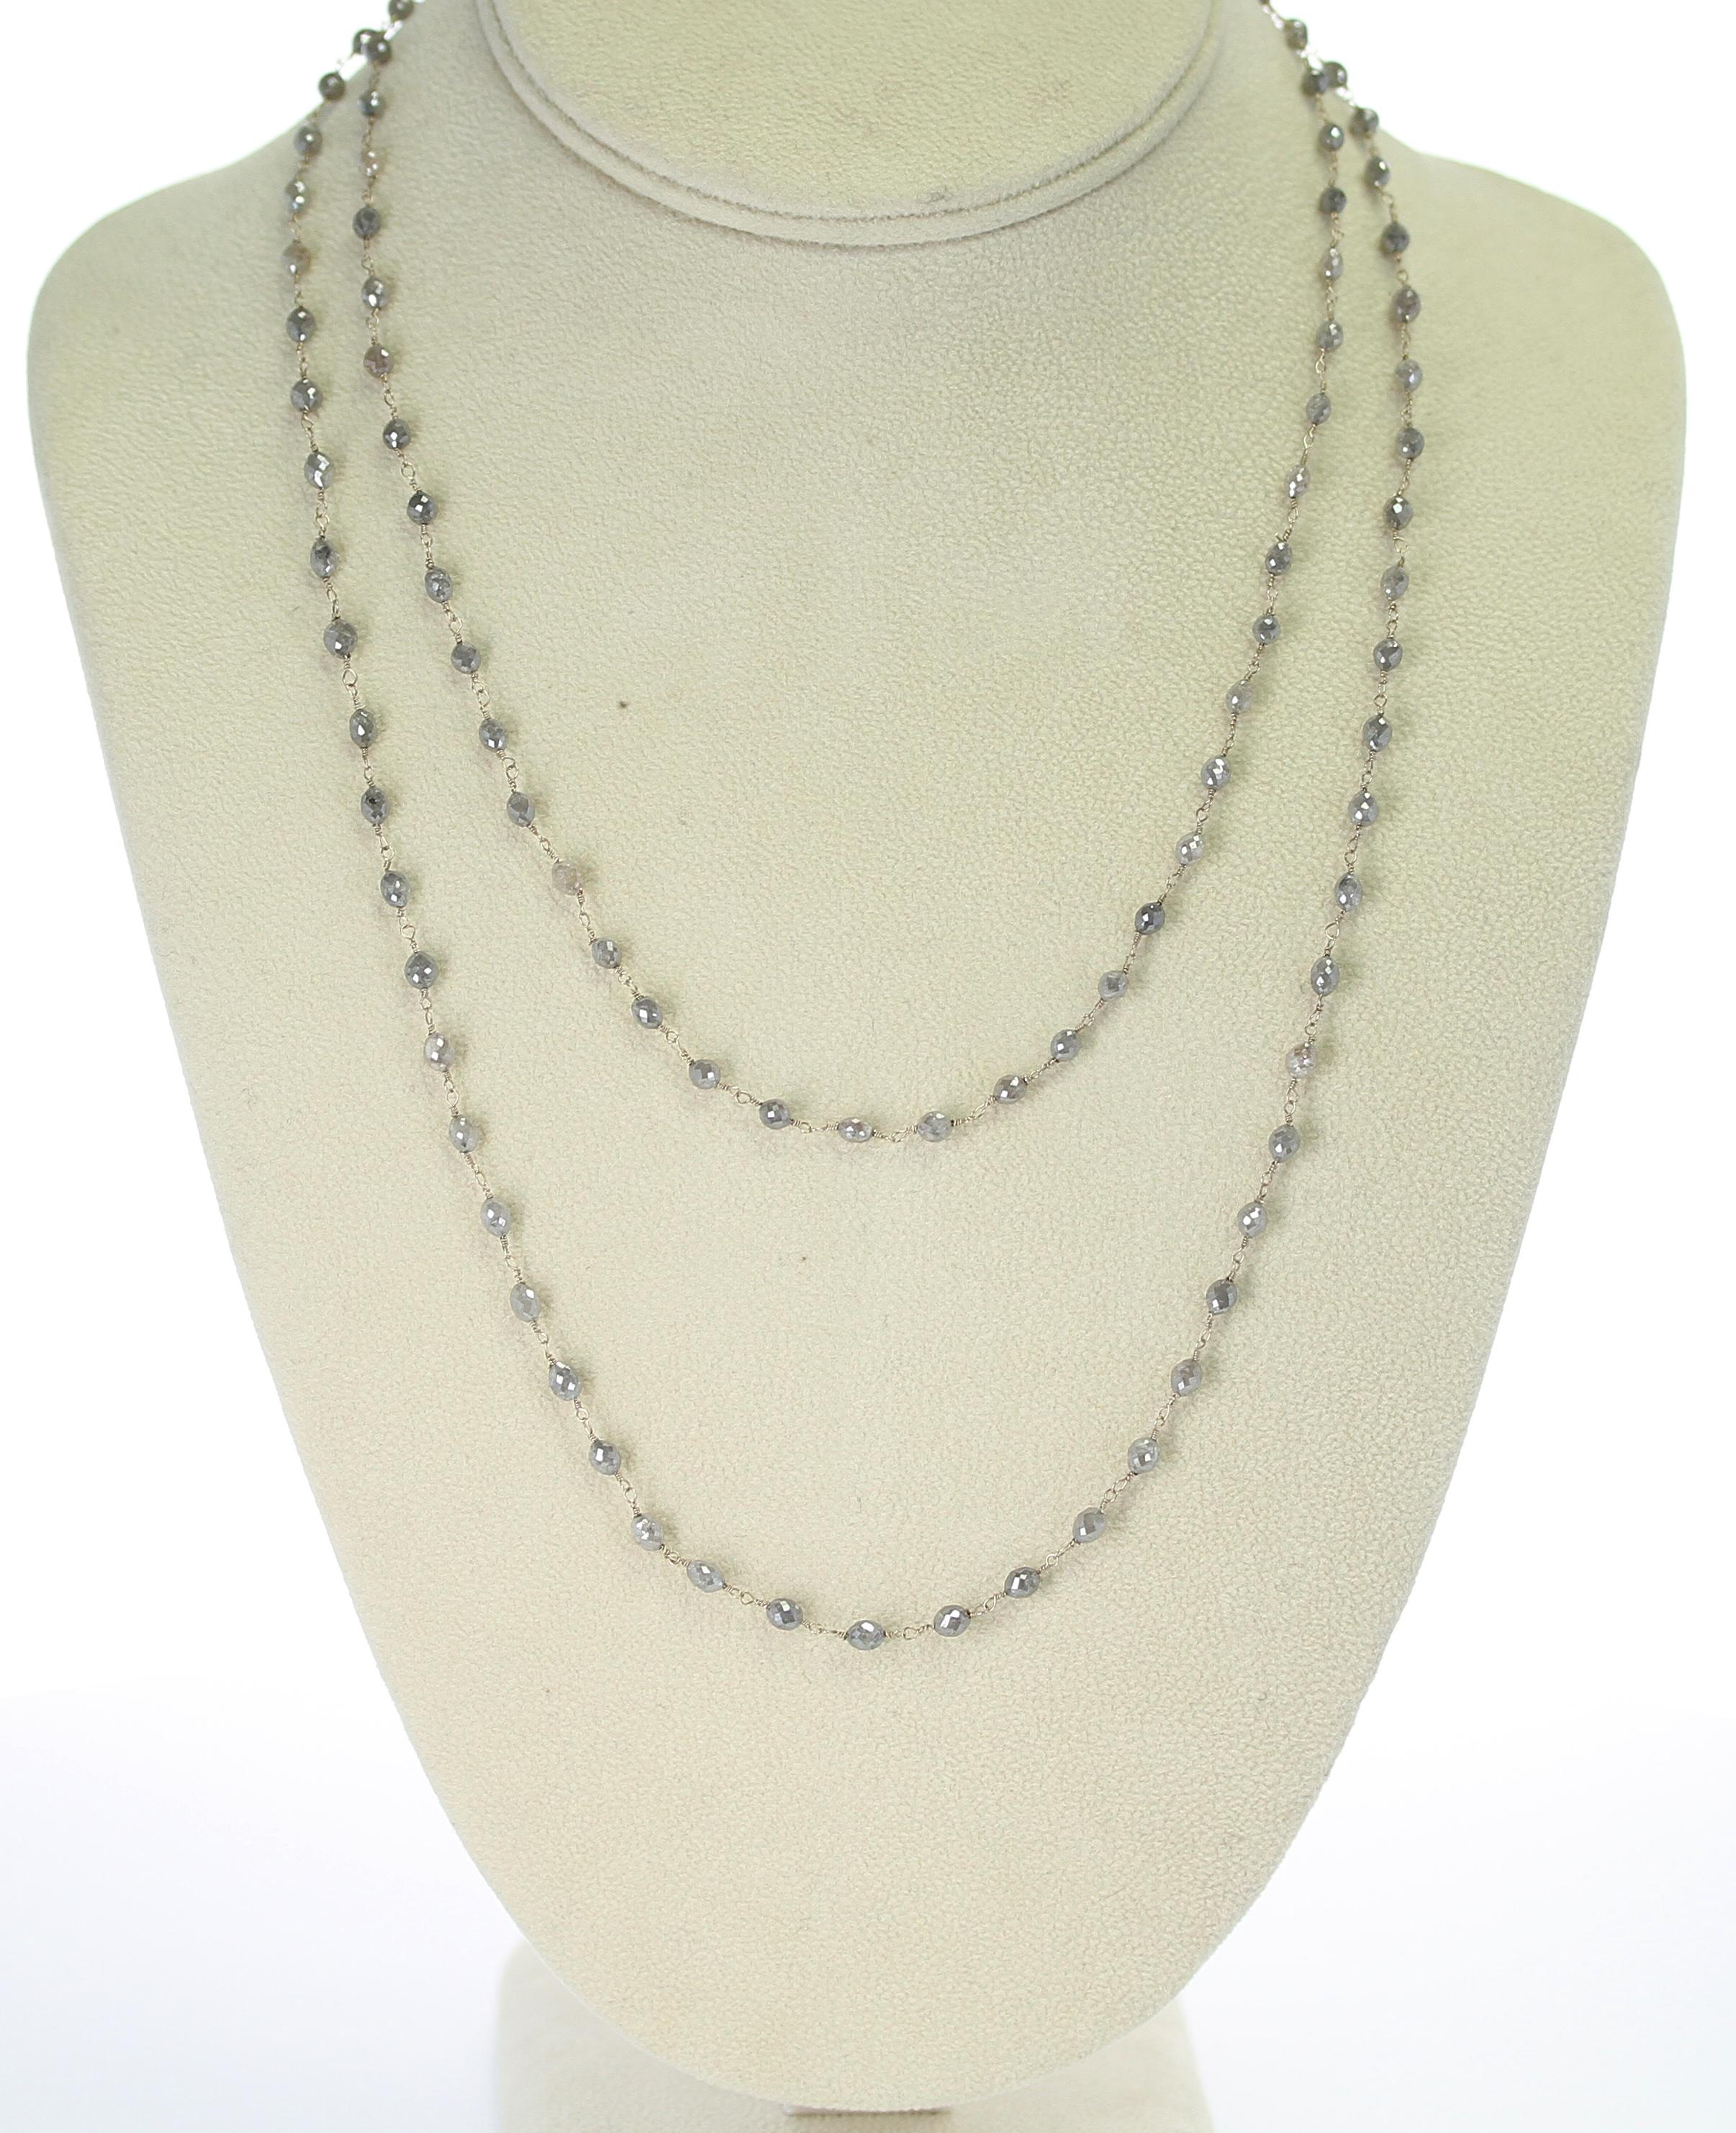 A Genuine Gray Diamond Drum-Shape Beads Wire-Wrapped Necklace 40